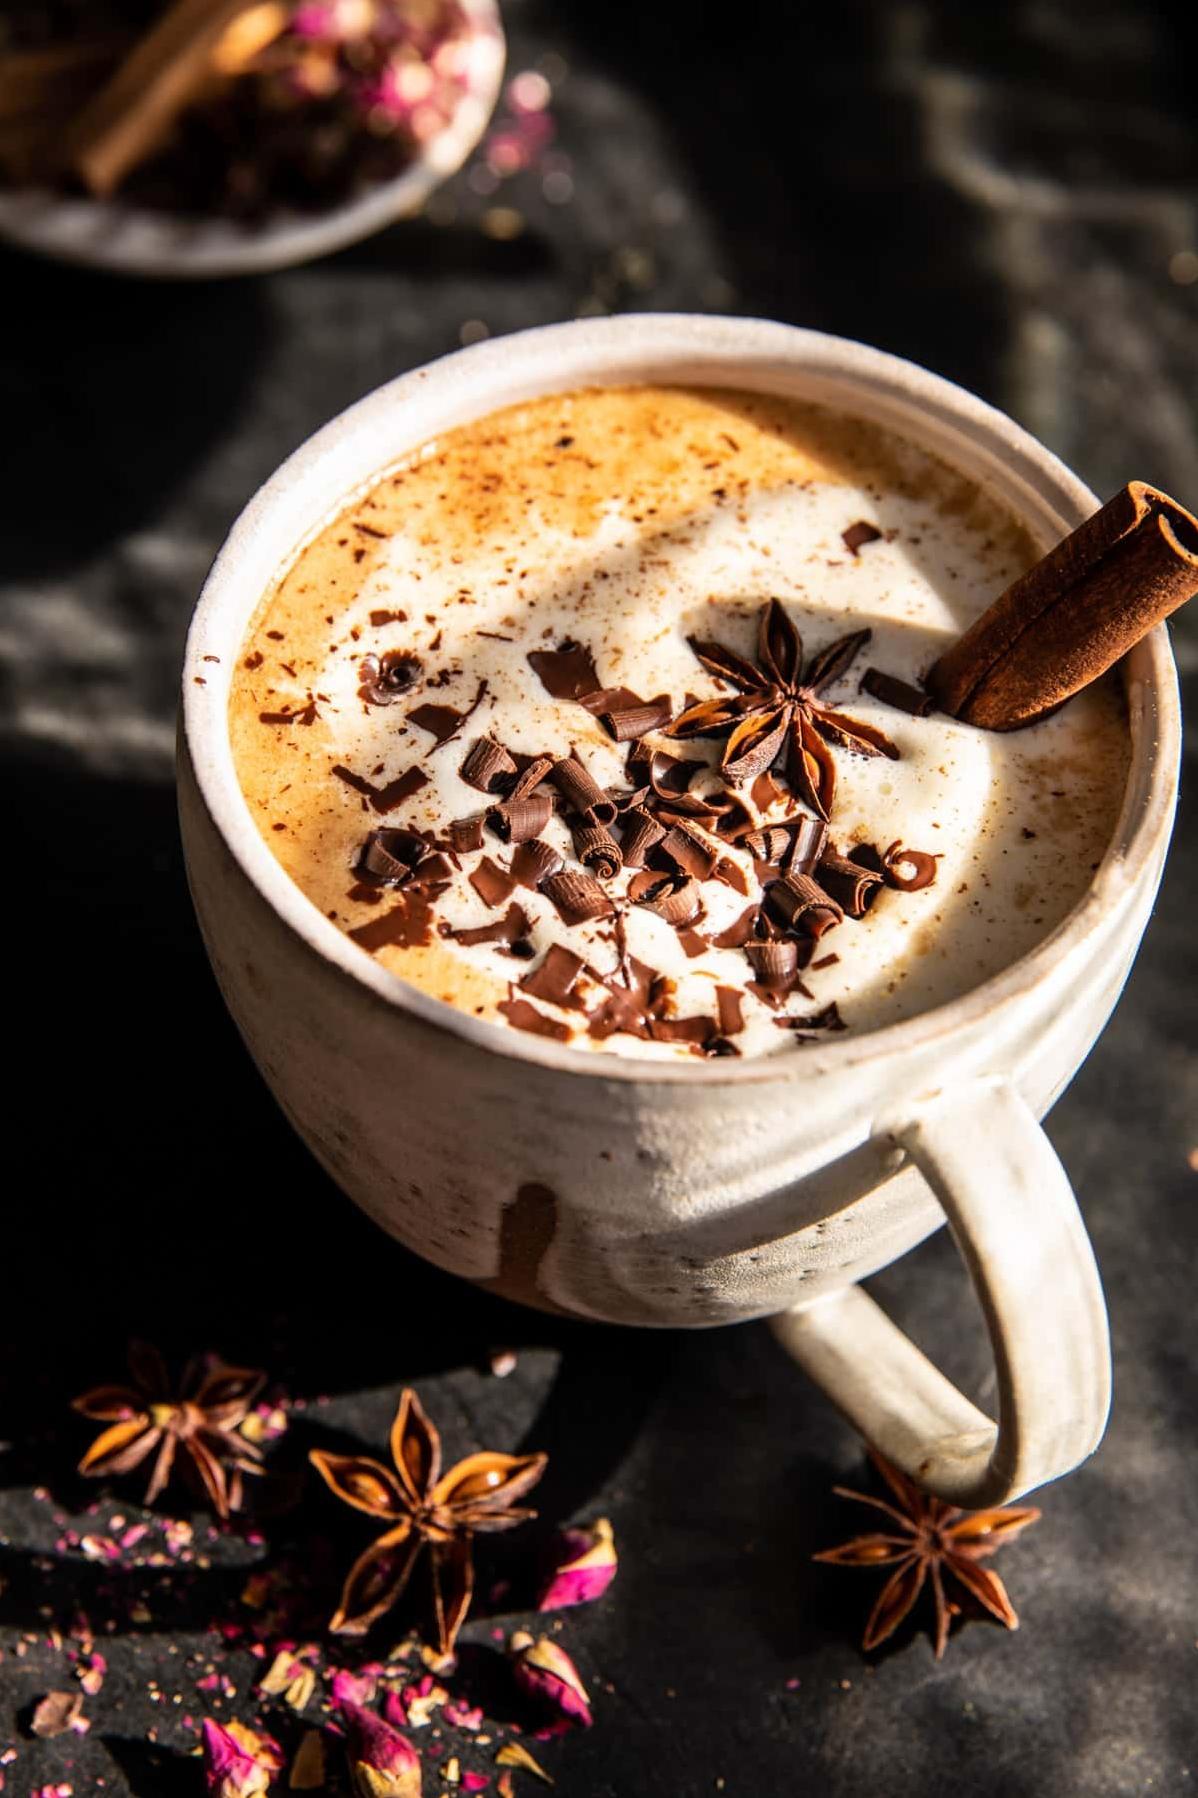  Sip into something comfortable and enjoy the bold flavors of the Chai Chocolate Coffee.